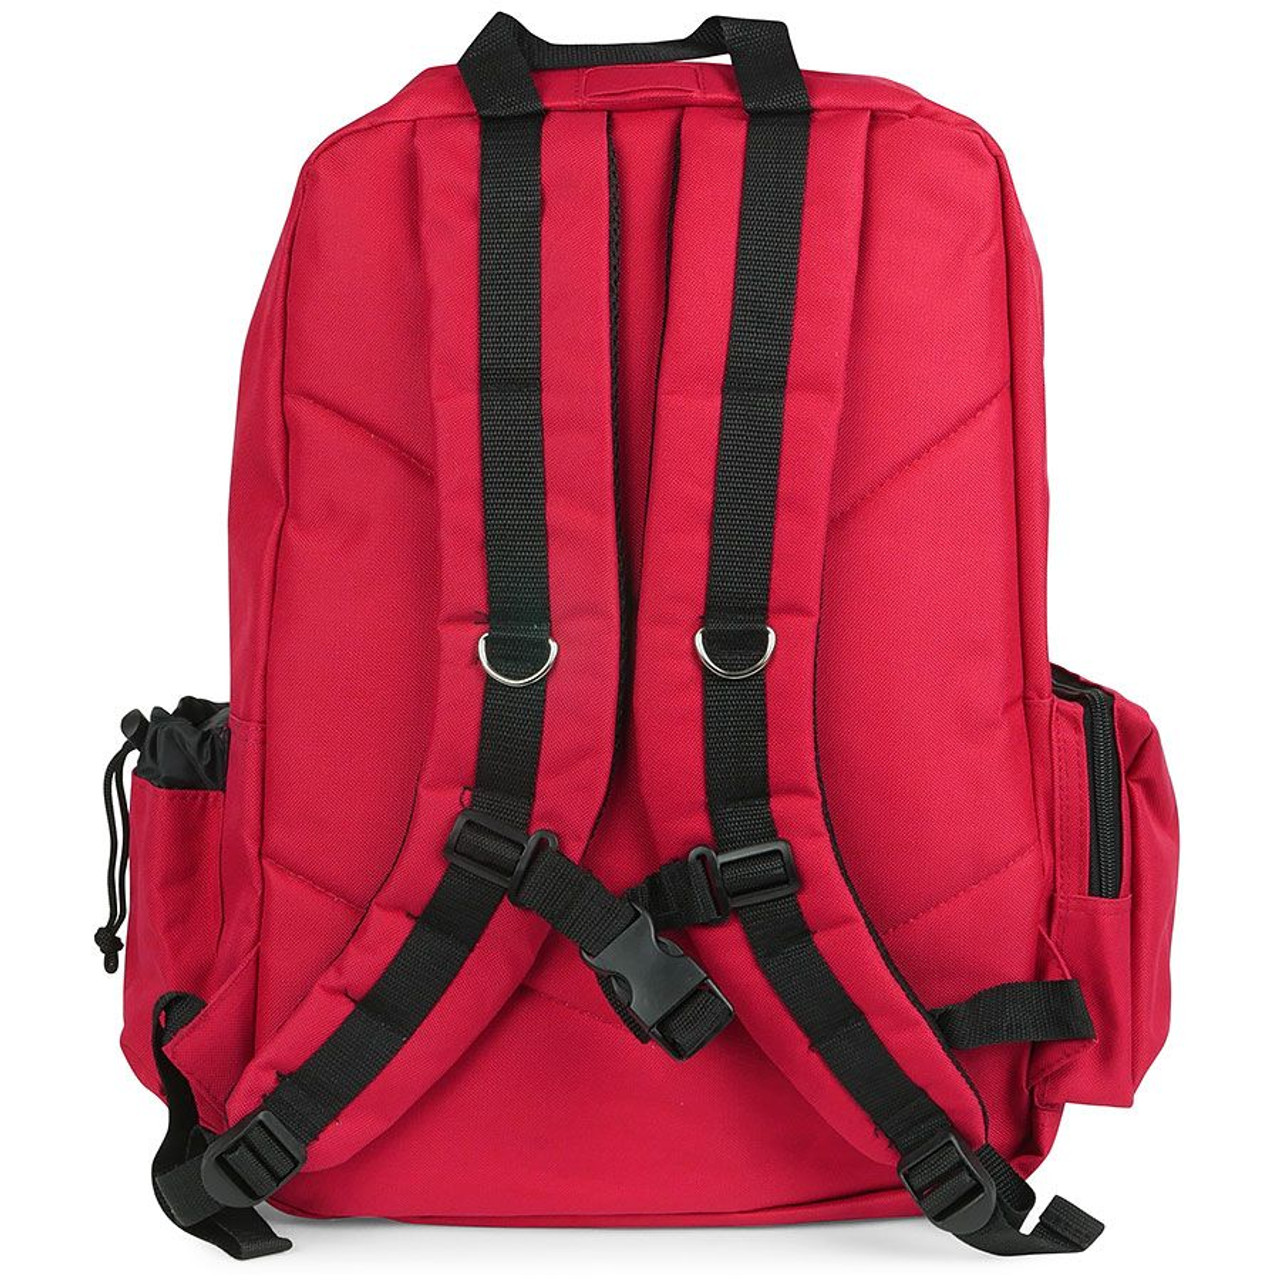 Deluxe Reponder Red Backpack First Medical Response Containers Emergency Kit - - Gear Survival Bags, and - Backpacks - Nylon EMT Aid Bag